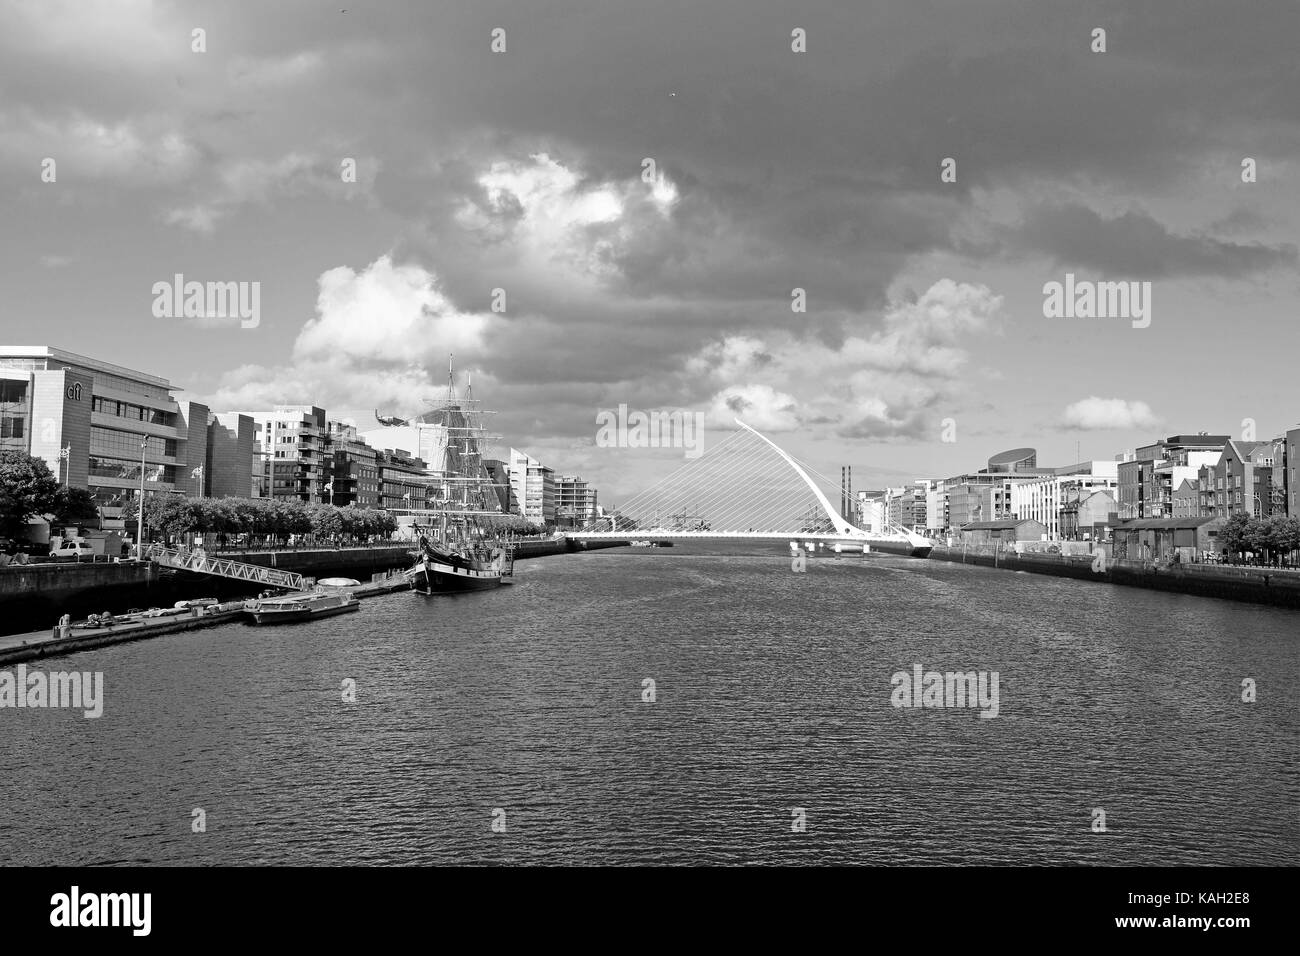 Since 2009 the Samuel Beckett Bridge has crossed the River Liffey connecting Sir John Rogerson's Quay with the North Wall Quay in Dublin, Ireland. Stock Photo